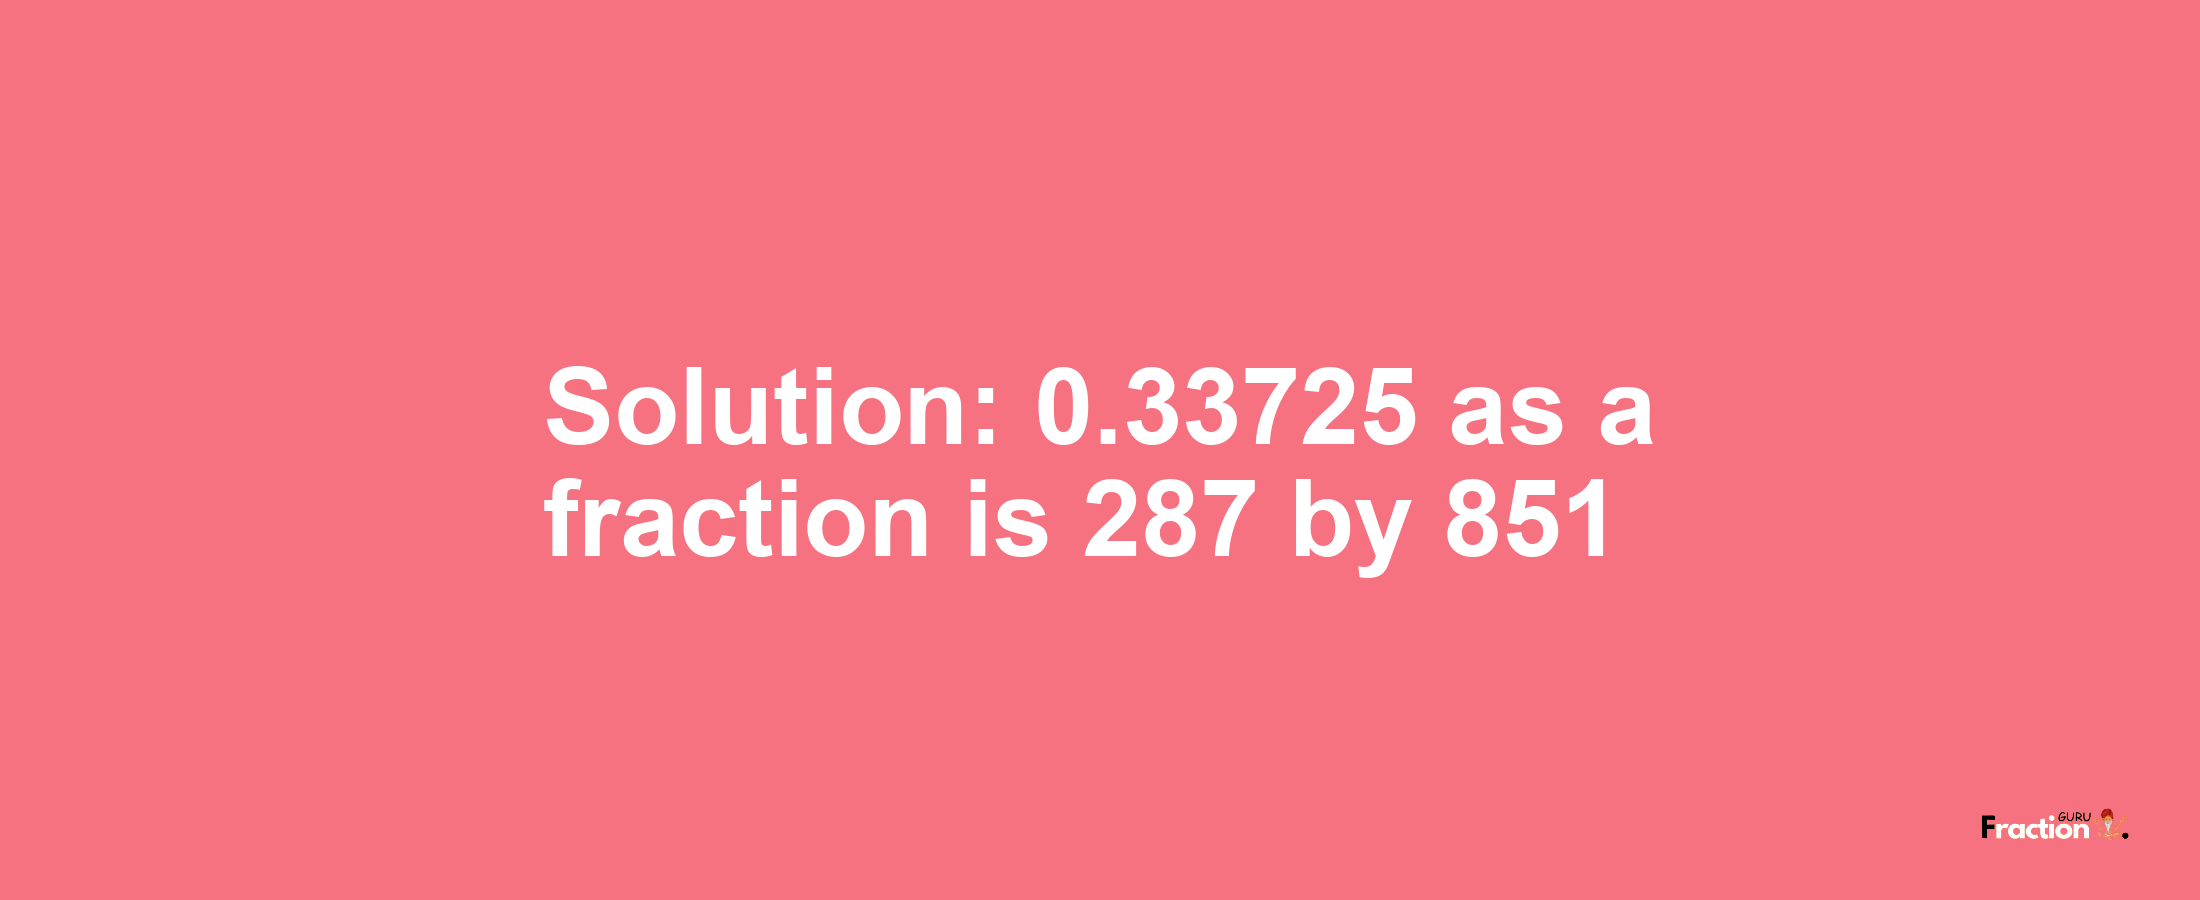 Solution:0.33725 as a fraction is 287/851